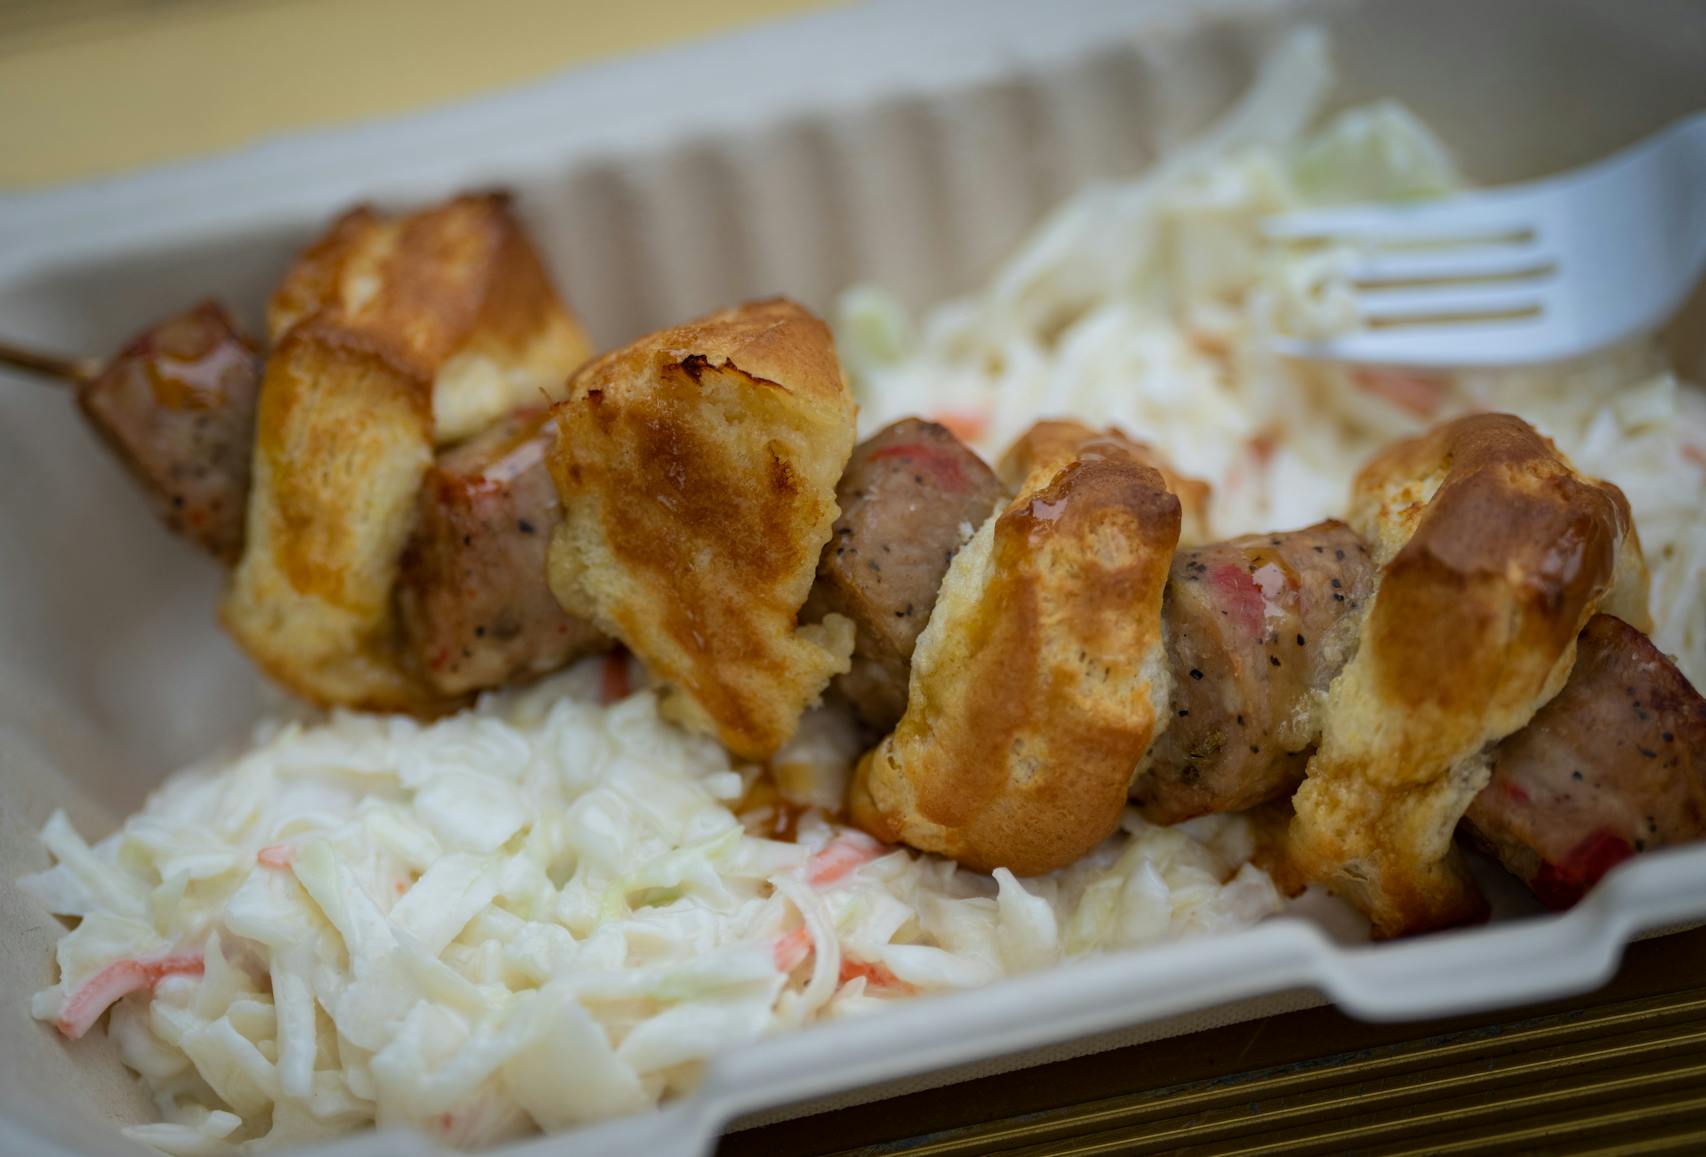 Buzz’n Hot Honey Chicken Sausage Kebob from Sausage Sister & Me. New foods at the Minnesota State Fair photographed on Thursday, Aug. 25, 2022 in Falcon Heights, Minn. ] RENEE JONES SCHNEIDER • renee.jones@startribune.com